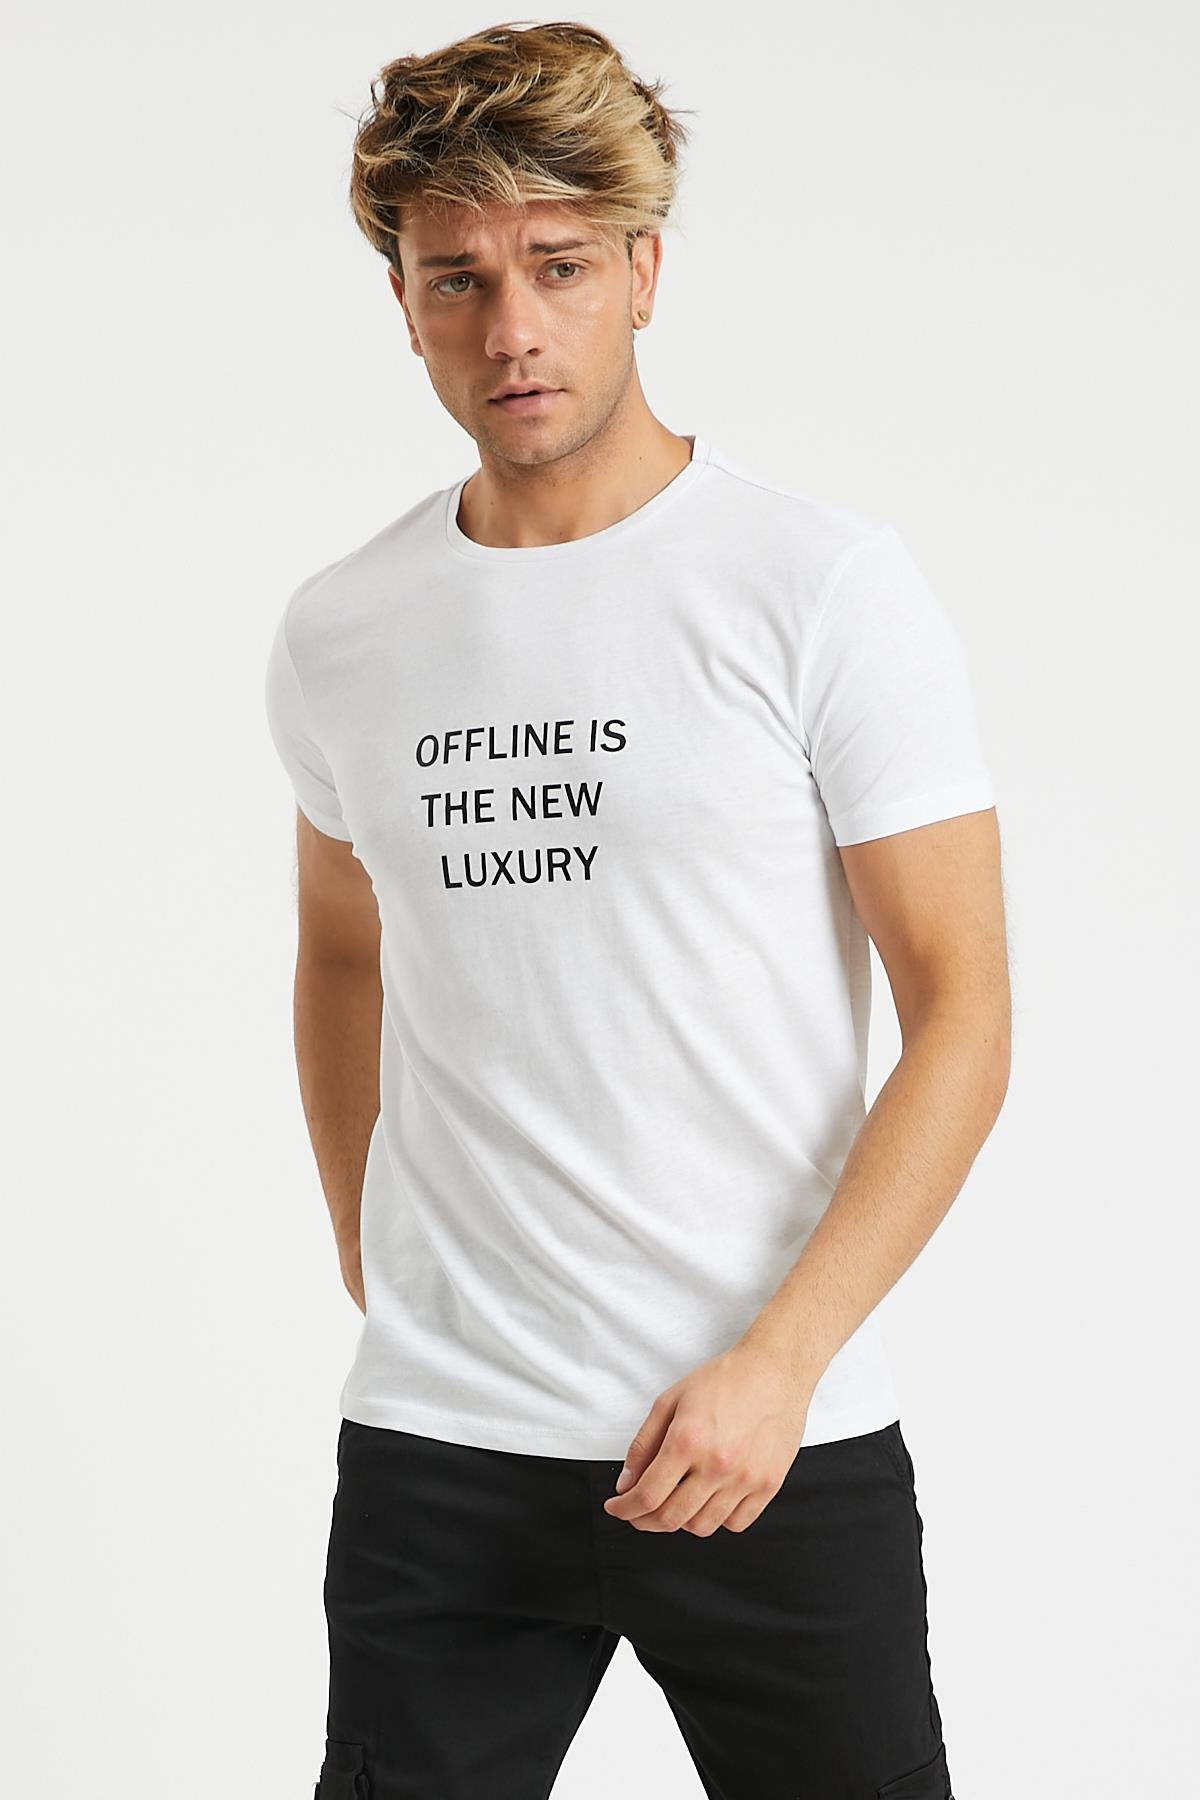 Off LINE IS THE NEW Luxury Graphic Printed, Cotton Crew Neck Men's T -shirt